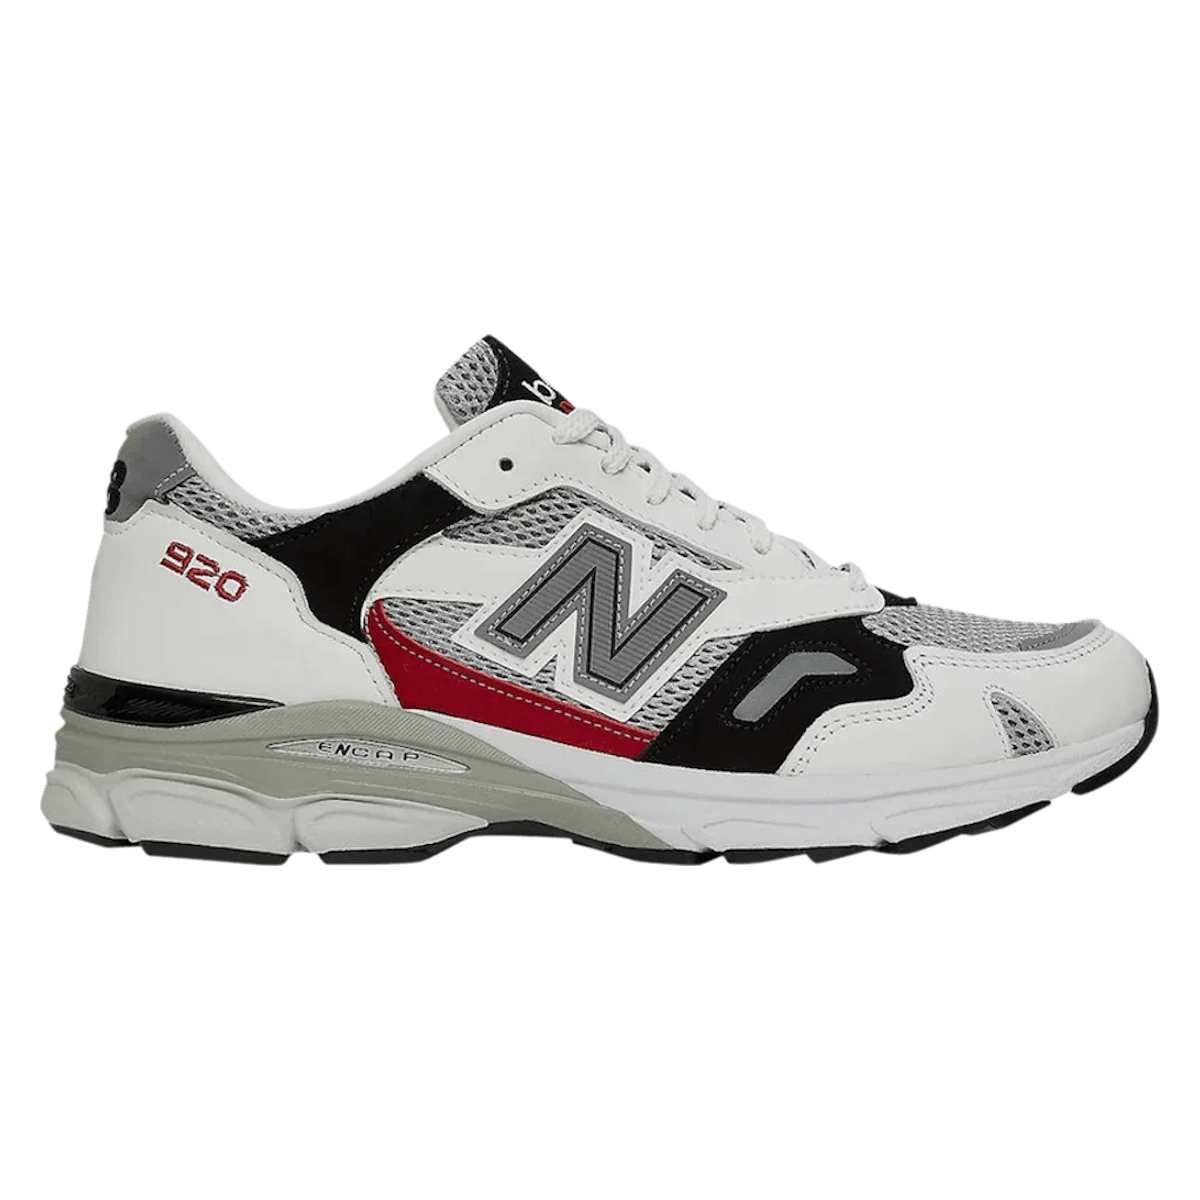 New Balance 920 Made in England "40th Anniversary"